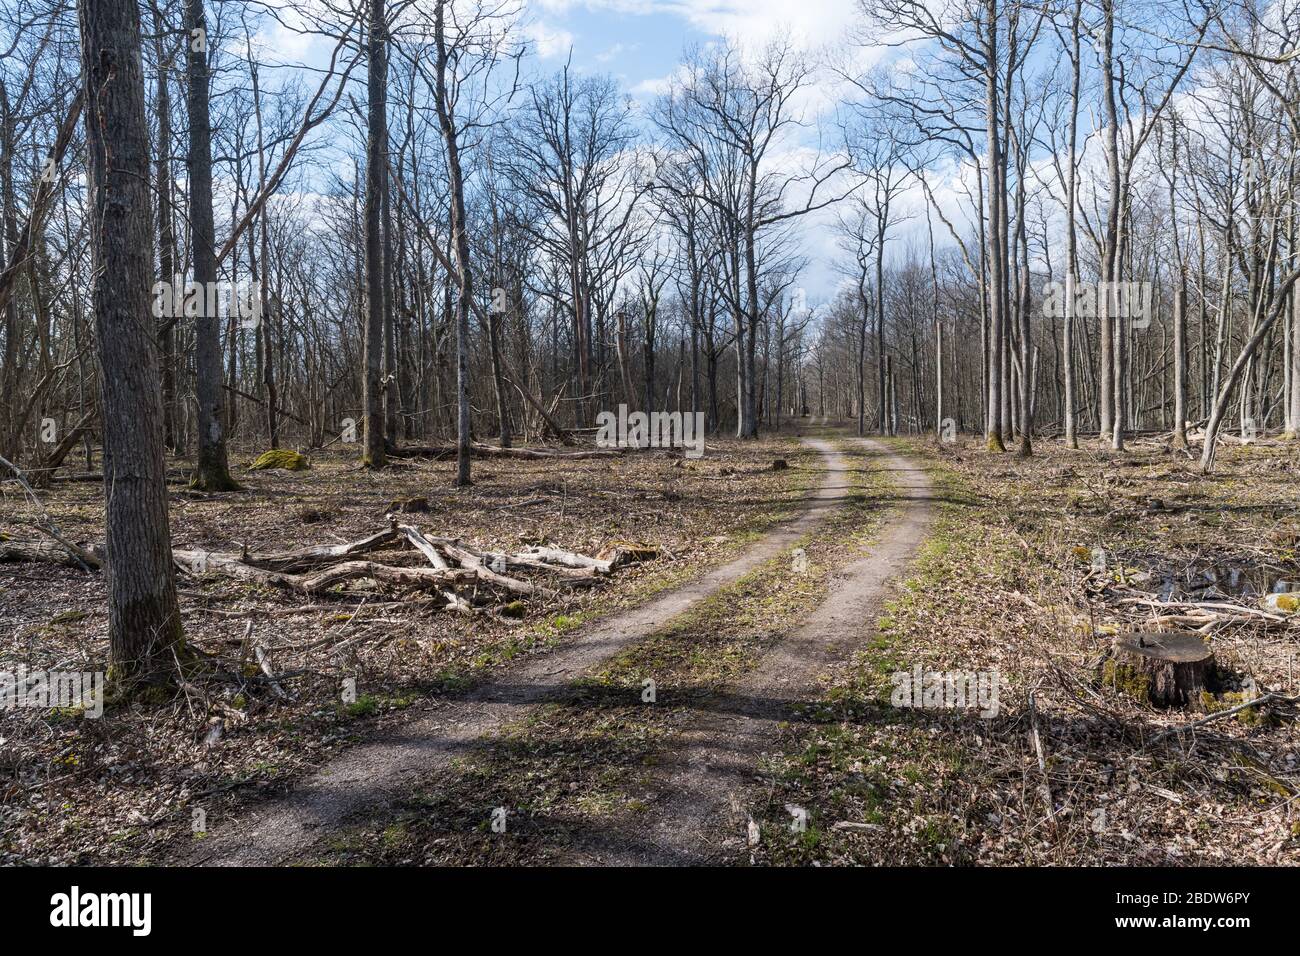 Dirt road through a bright deciduous forest in early spring season Stock Photo